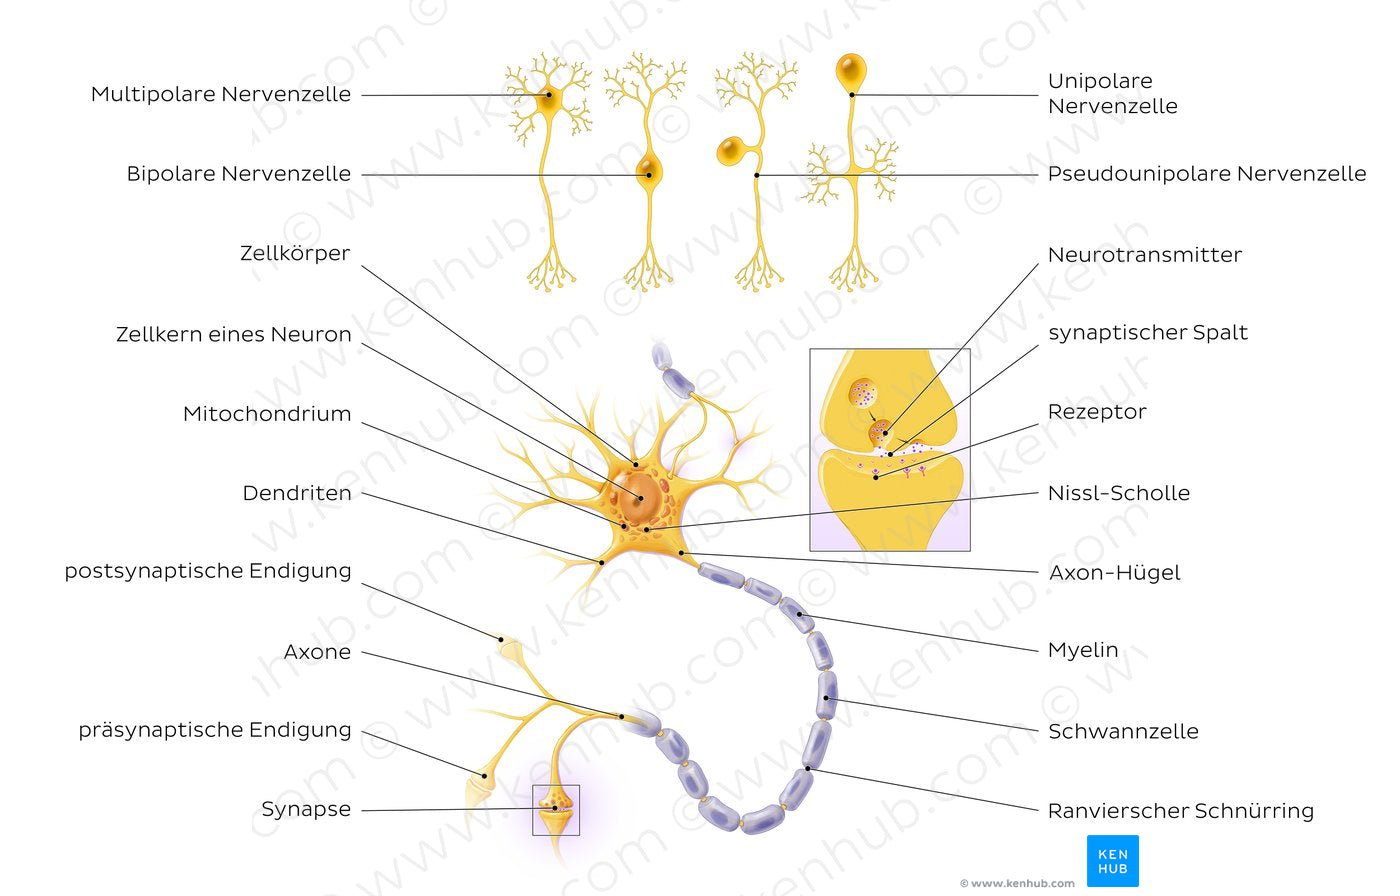 Neurons: Structure and types (German)